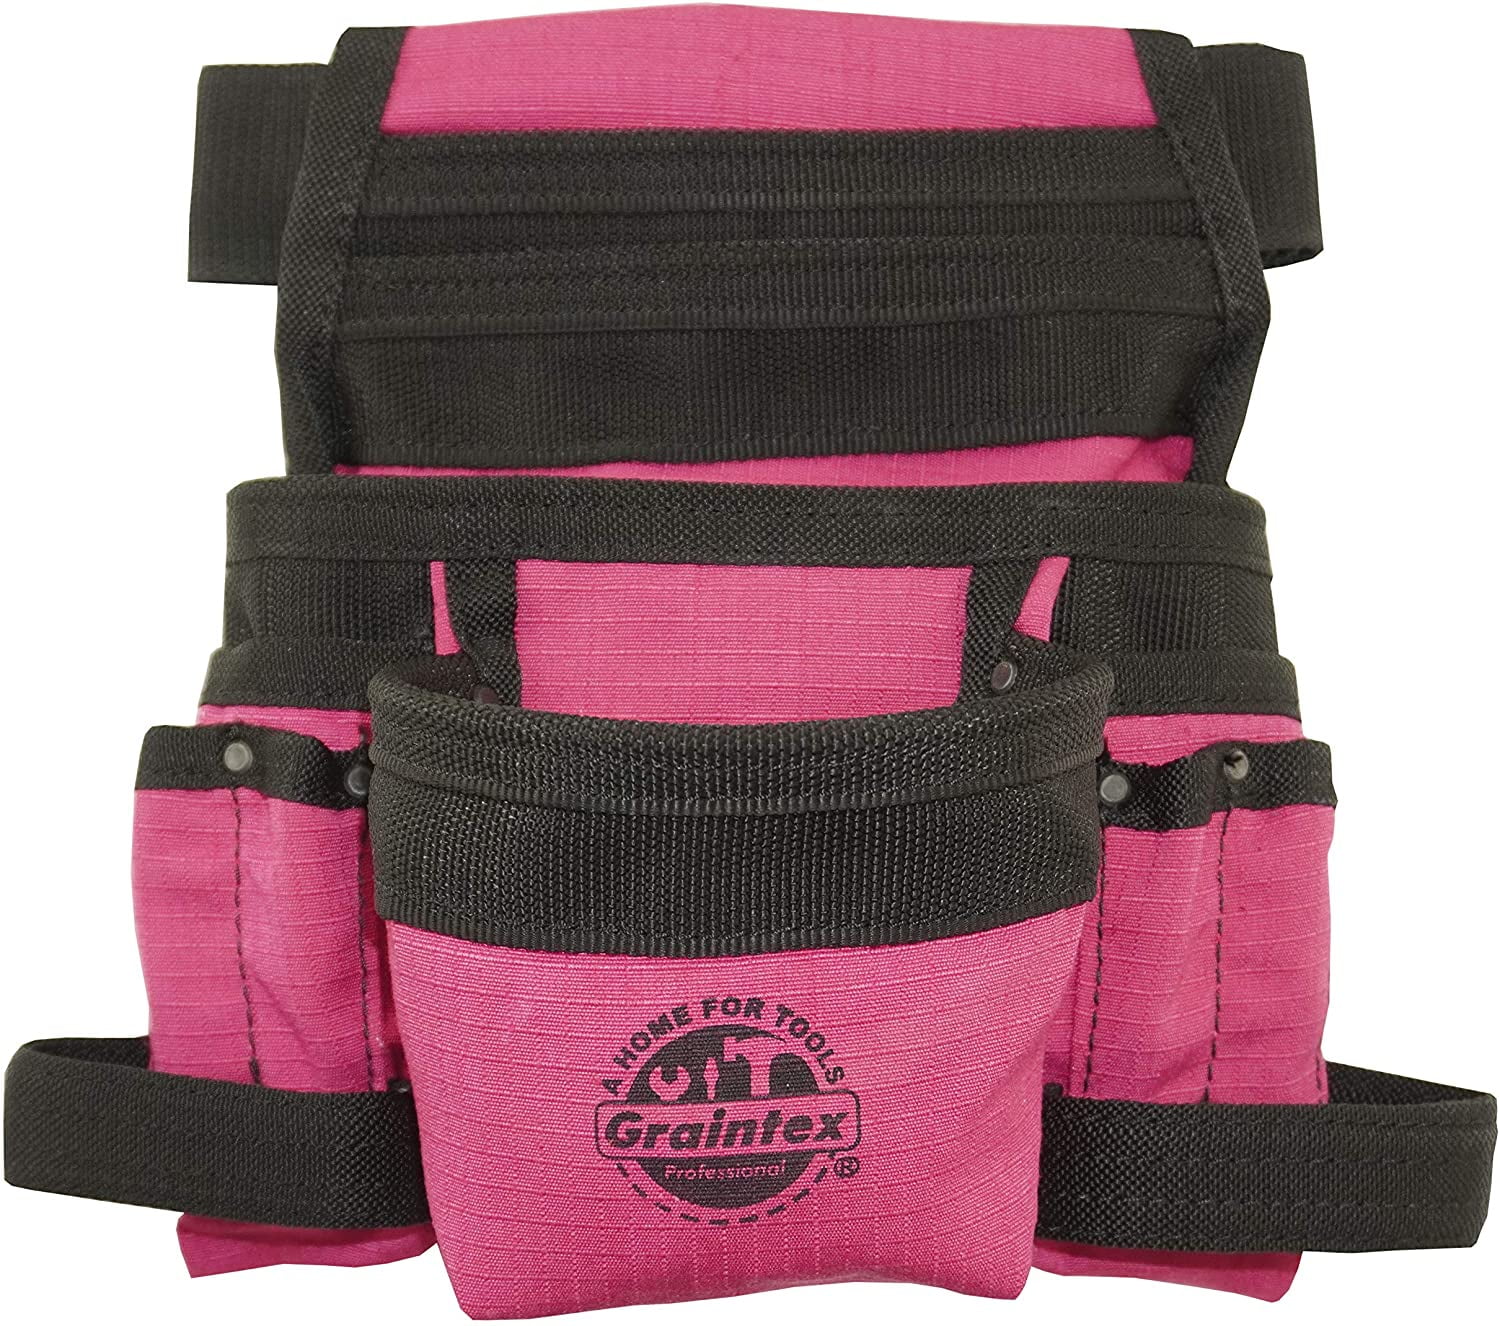 Born Tough Women's Suede Leather Pink Tool Pouch Bag Belt 